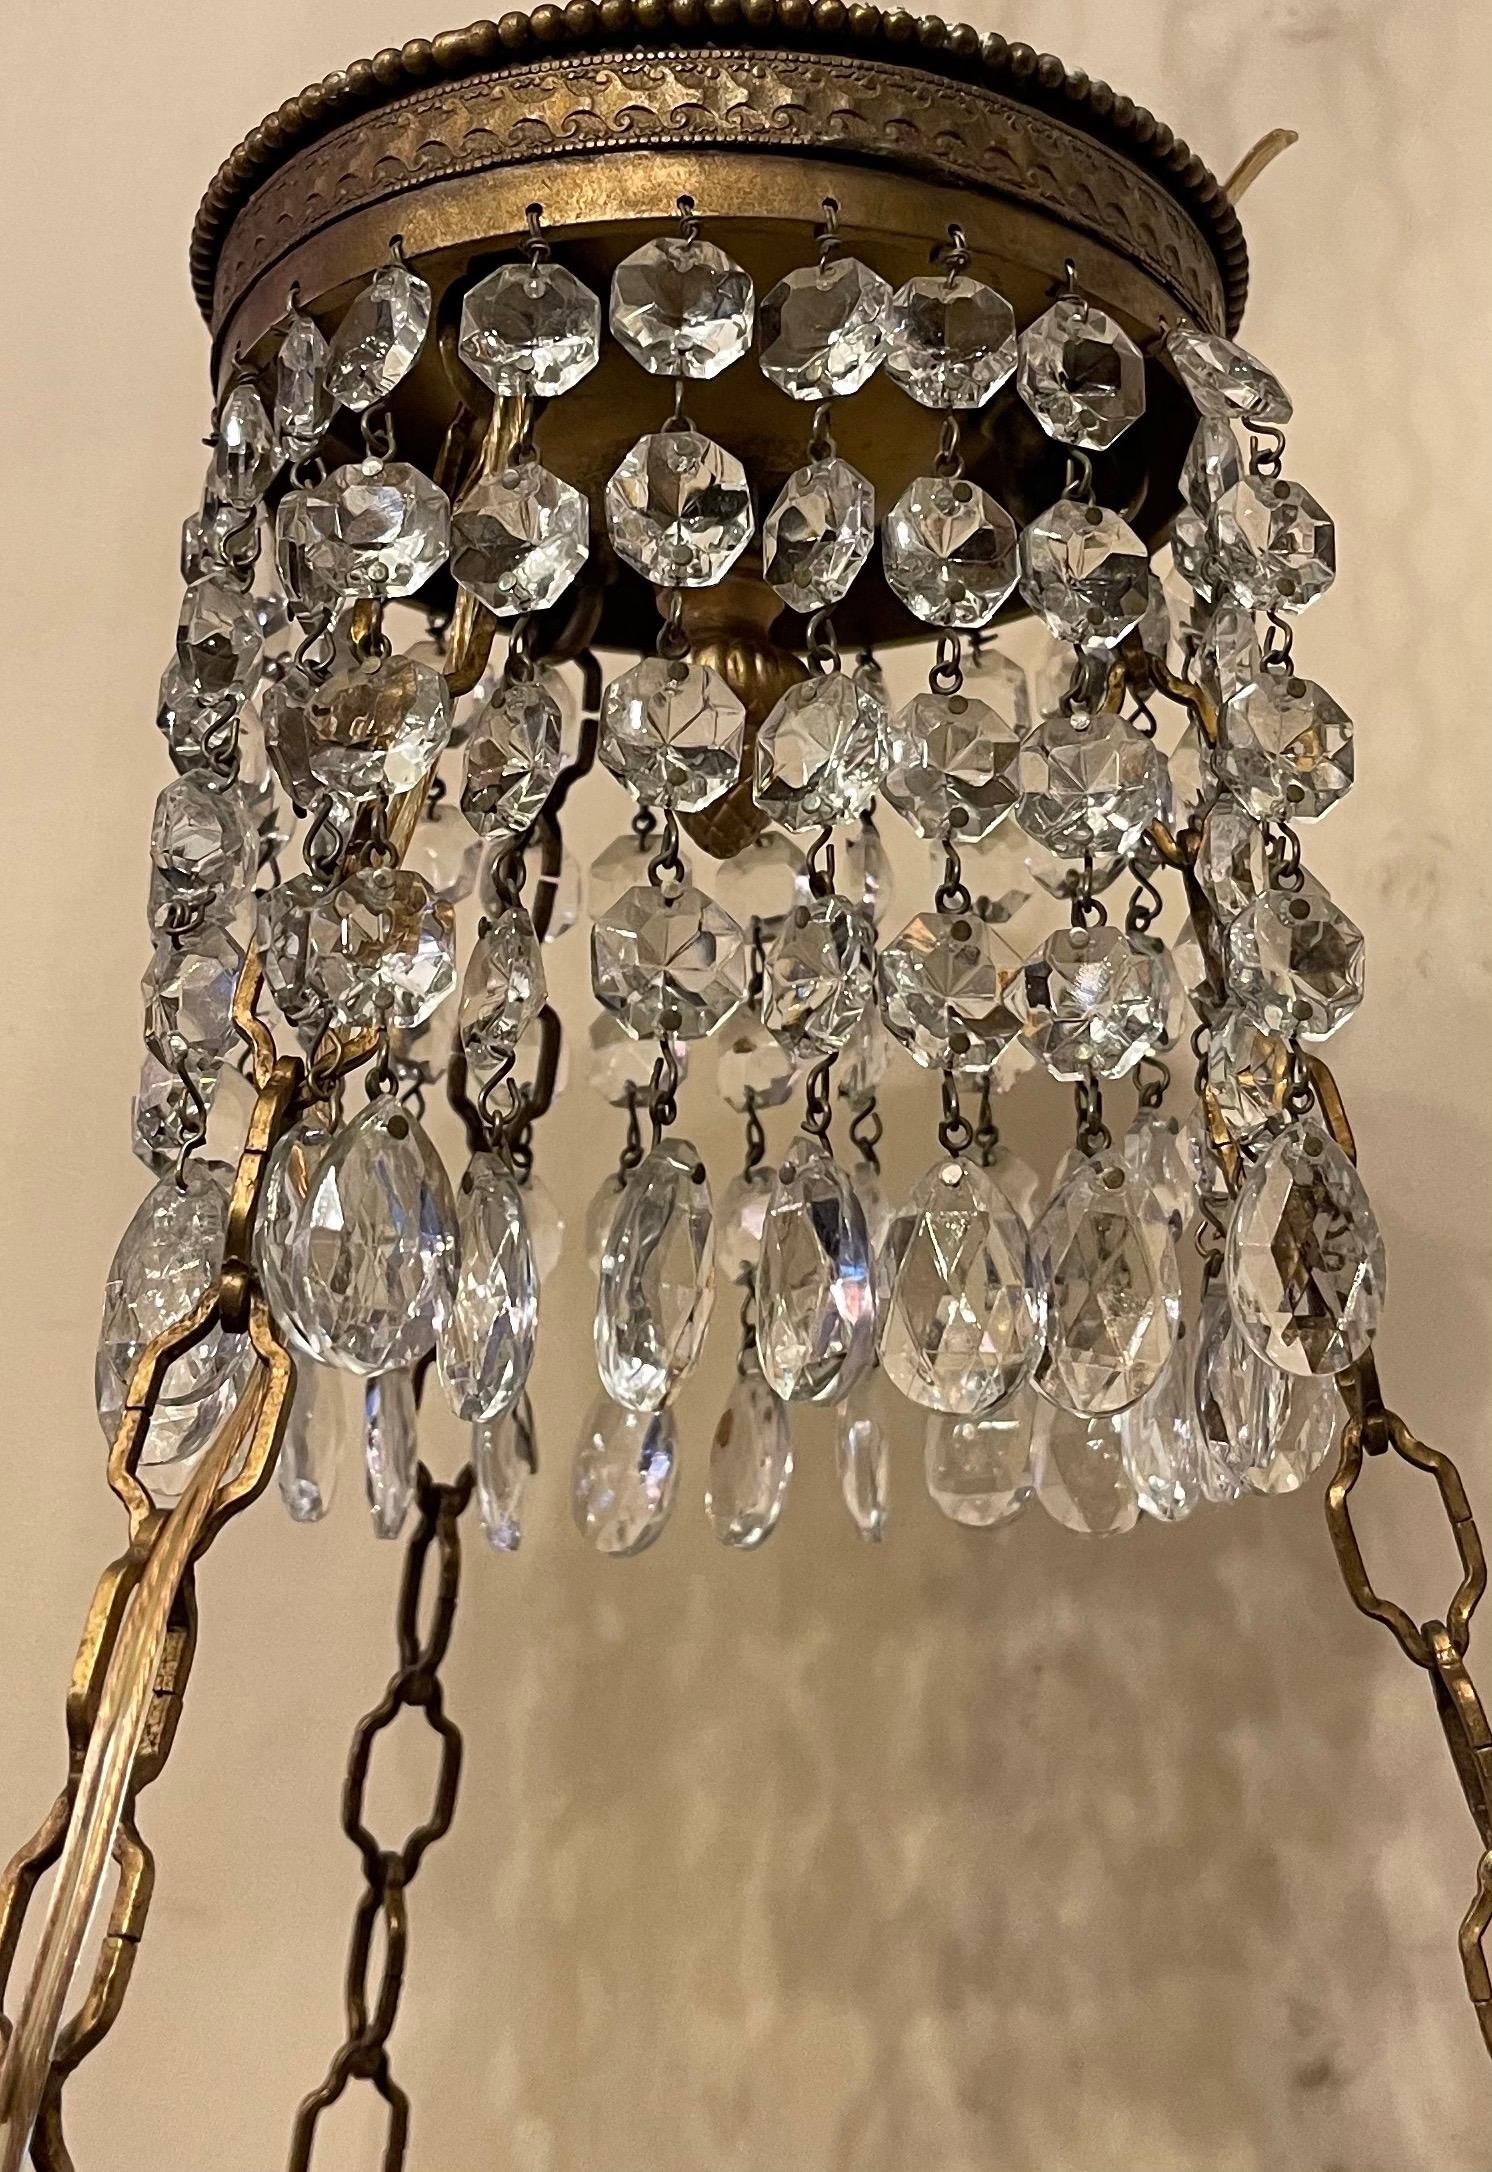 Faceted Wonderful Neoclassical Etched Cut-Crystal Bowl Bronze Chandelier Ormolu Fixture For Sale